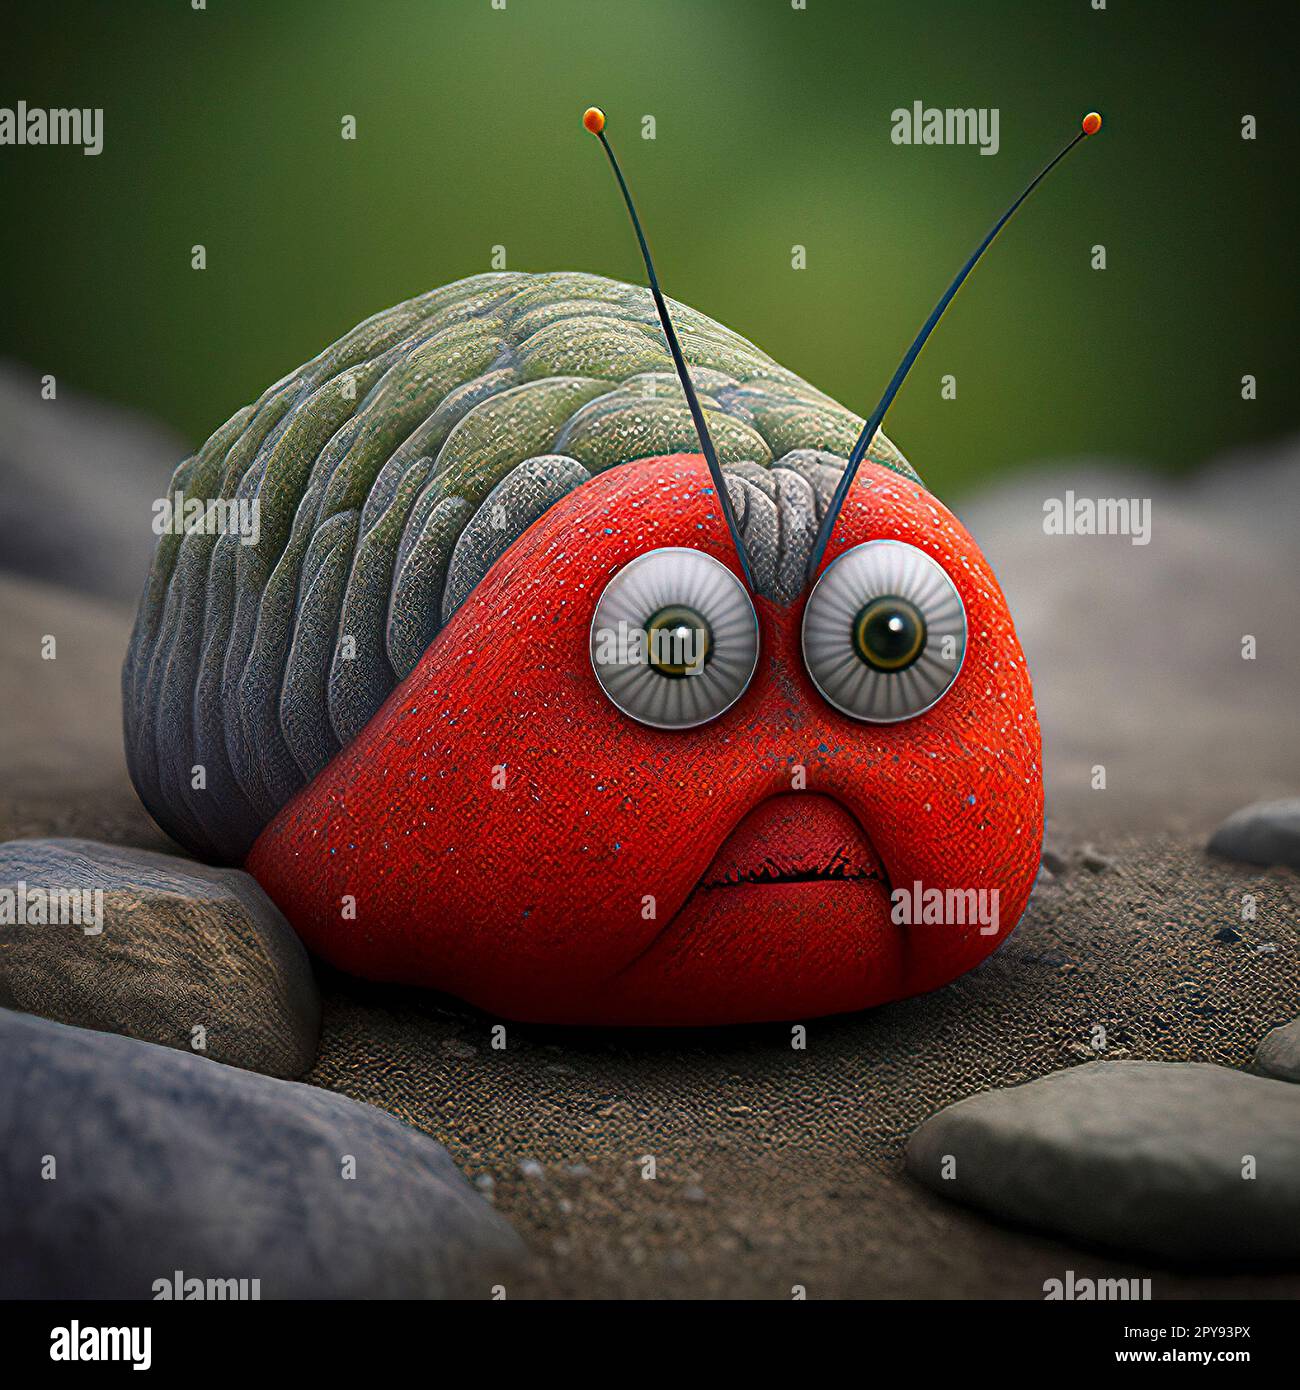 A Digital Art Depiction of a Cute-looking Bug with Big Eyes, Delicate Antennae, and Soft, Fuzzy Texture Has a Comically Angry Expression Stock Photo